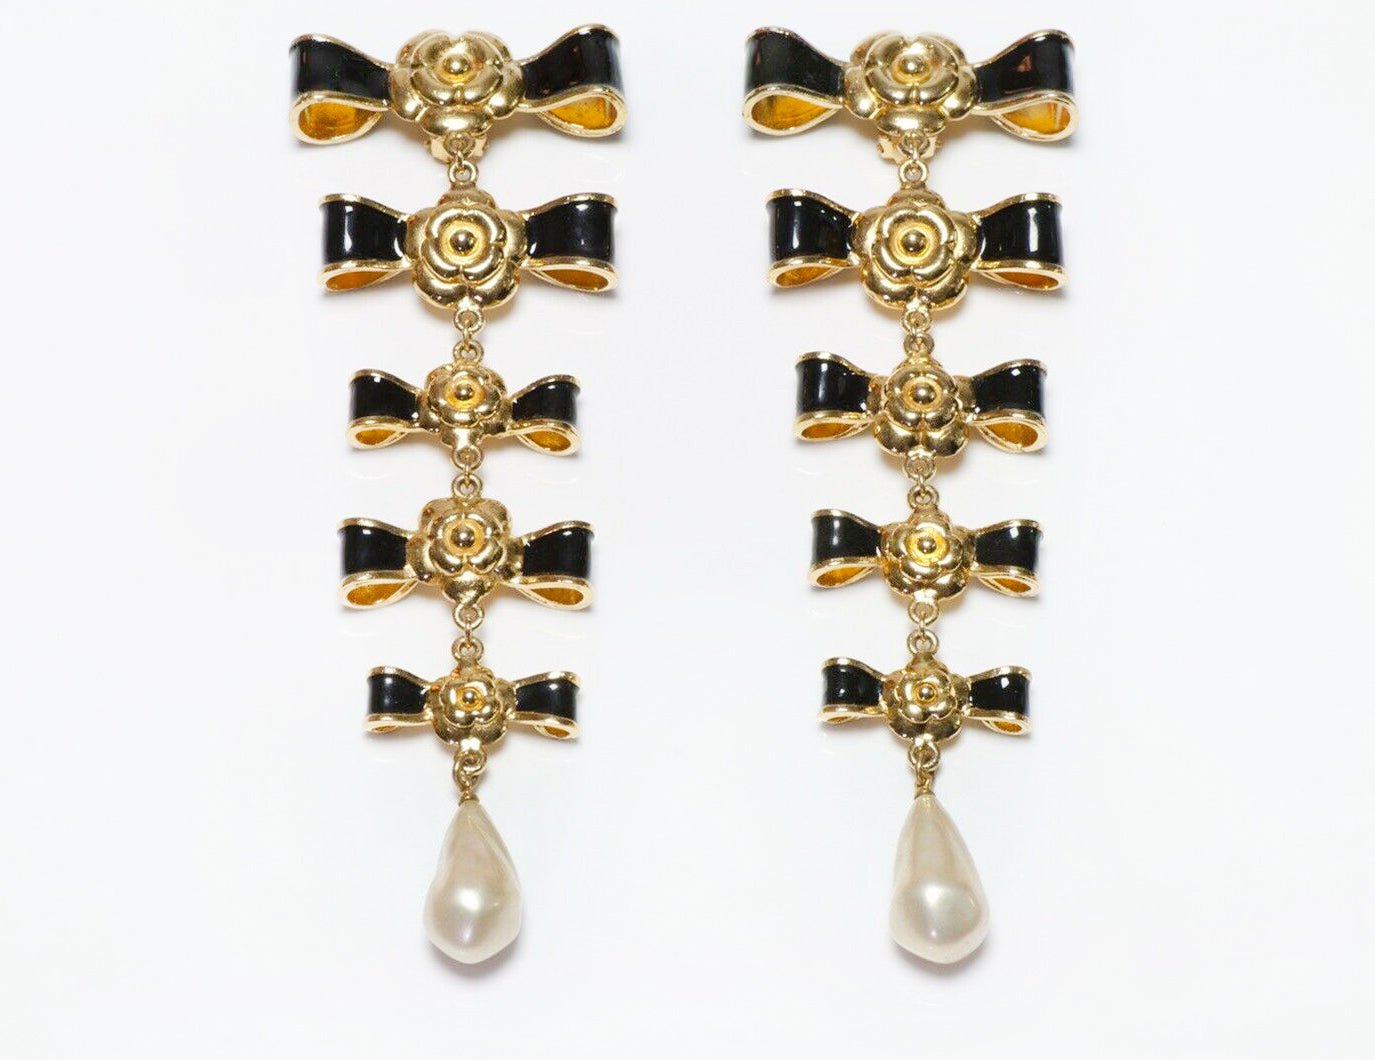 CHANEL Paris Extra Long Black Enamel Bows Camellia Pearl Earrings - DSF Antique Jewelry